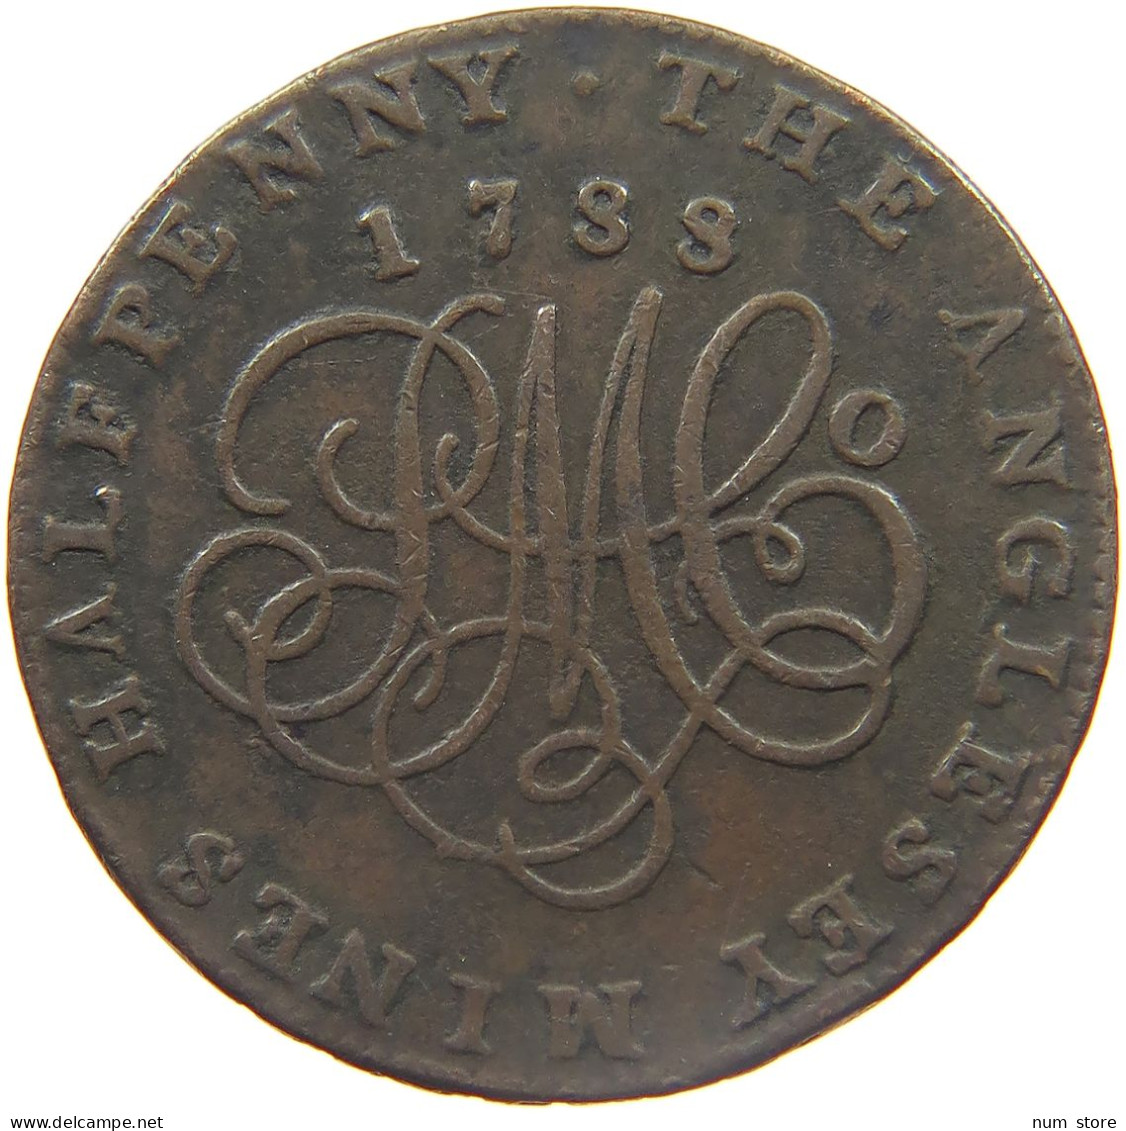 GREAT BRITAIN HALFPENNY 1788 ANGLESEY #MA 023071 - I. 1/2 Crown